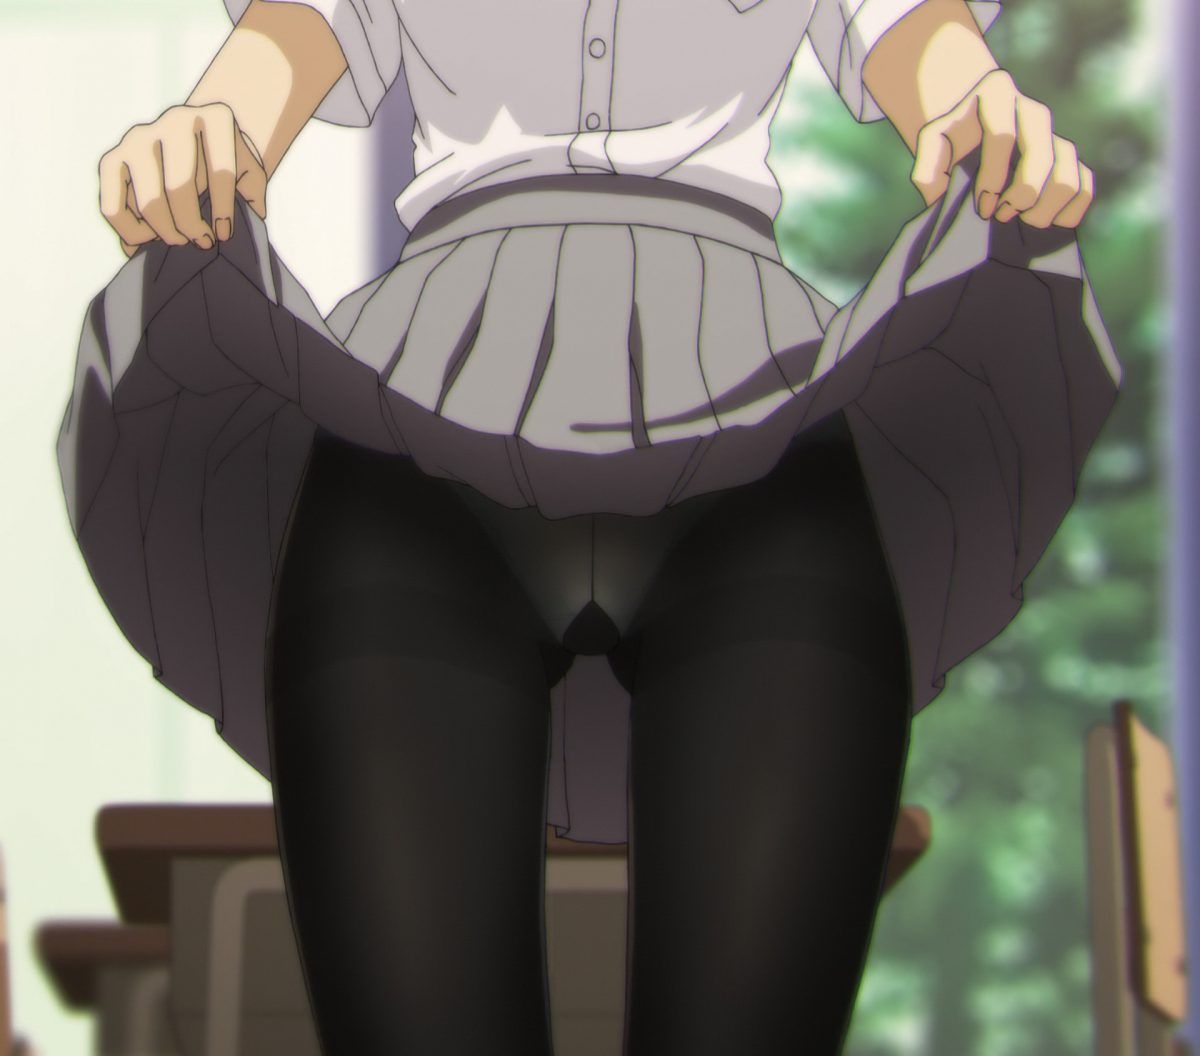 Happy Tights Day from Japan! Why Are Stockings So Great? J-List Blog pic